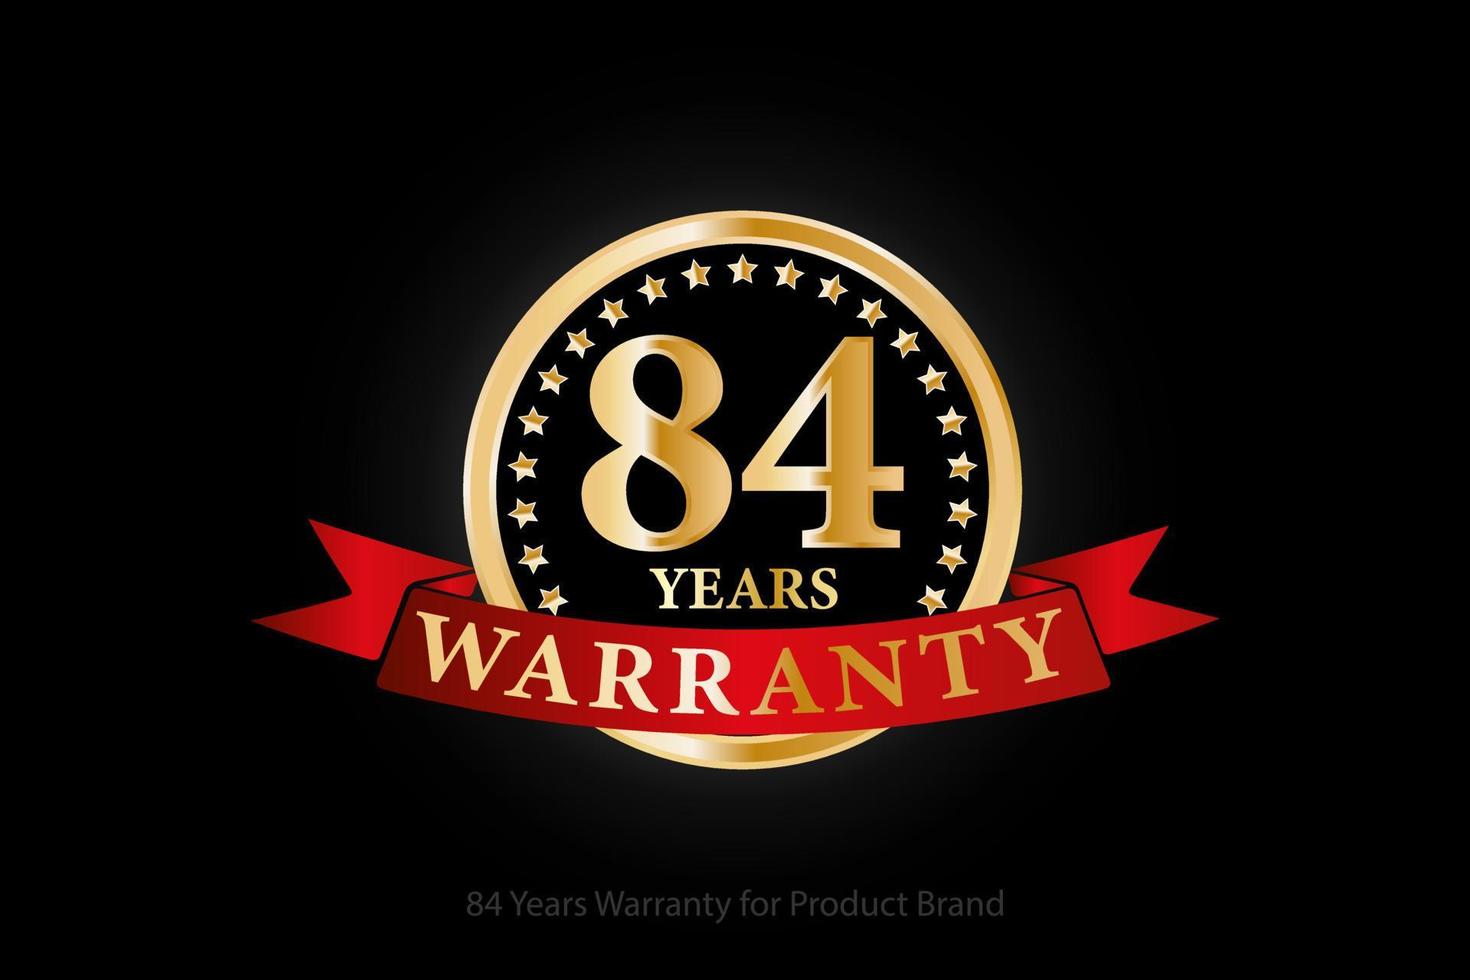 84 years warranty golden logo with ring and red ribbon isolated on black background, vector design for product warranty, guarantee, service, corporate, and your business.